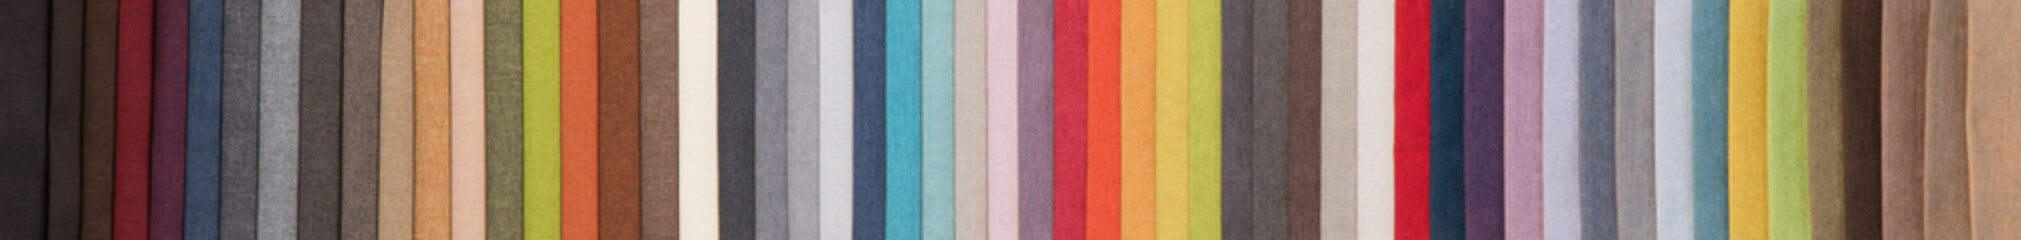 samples of different colored fabrics